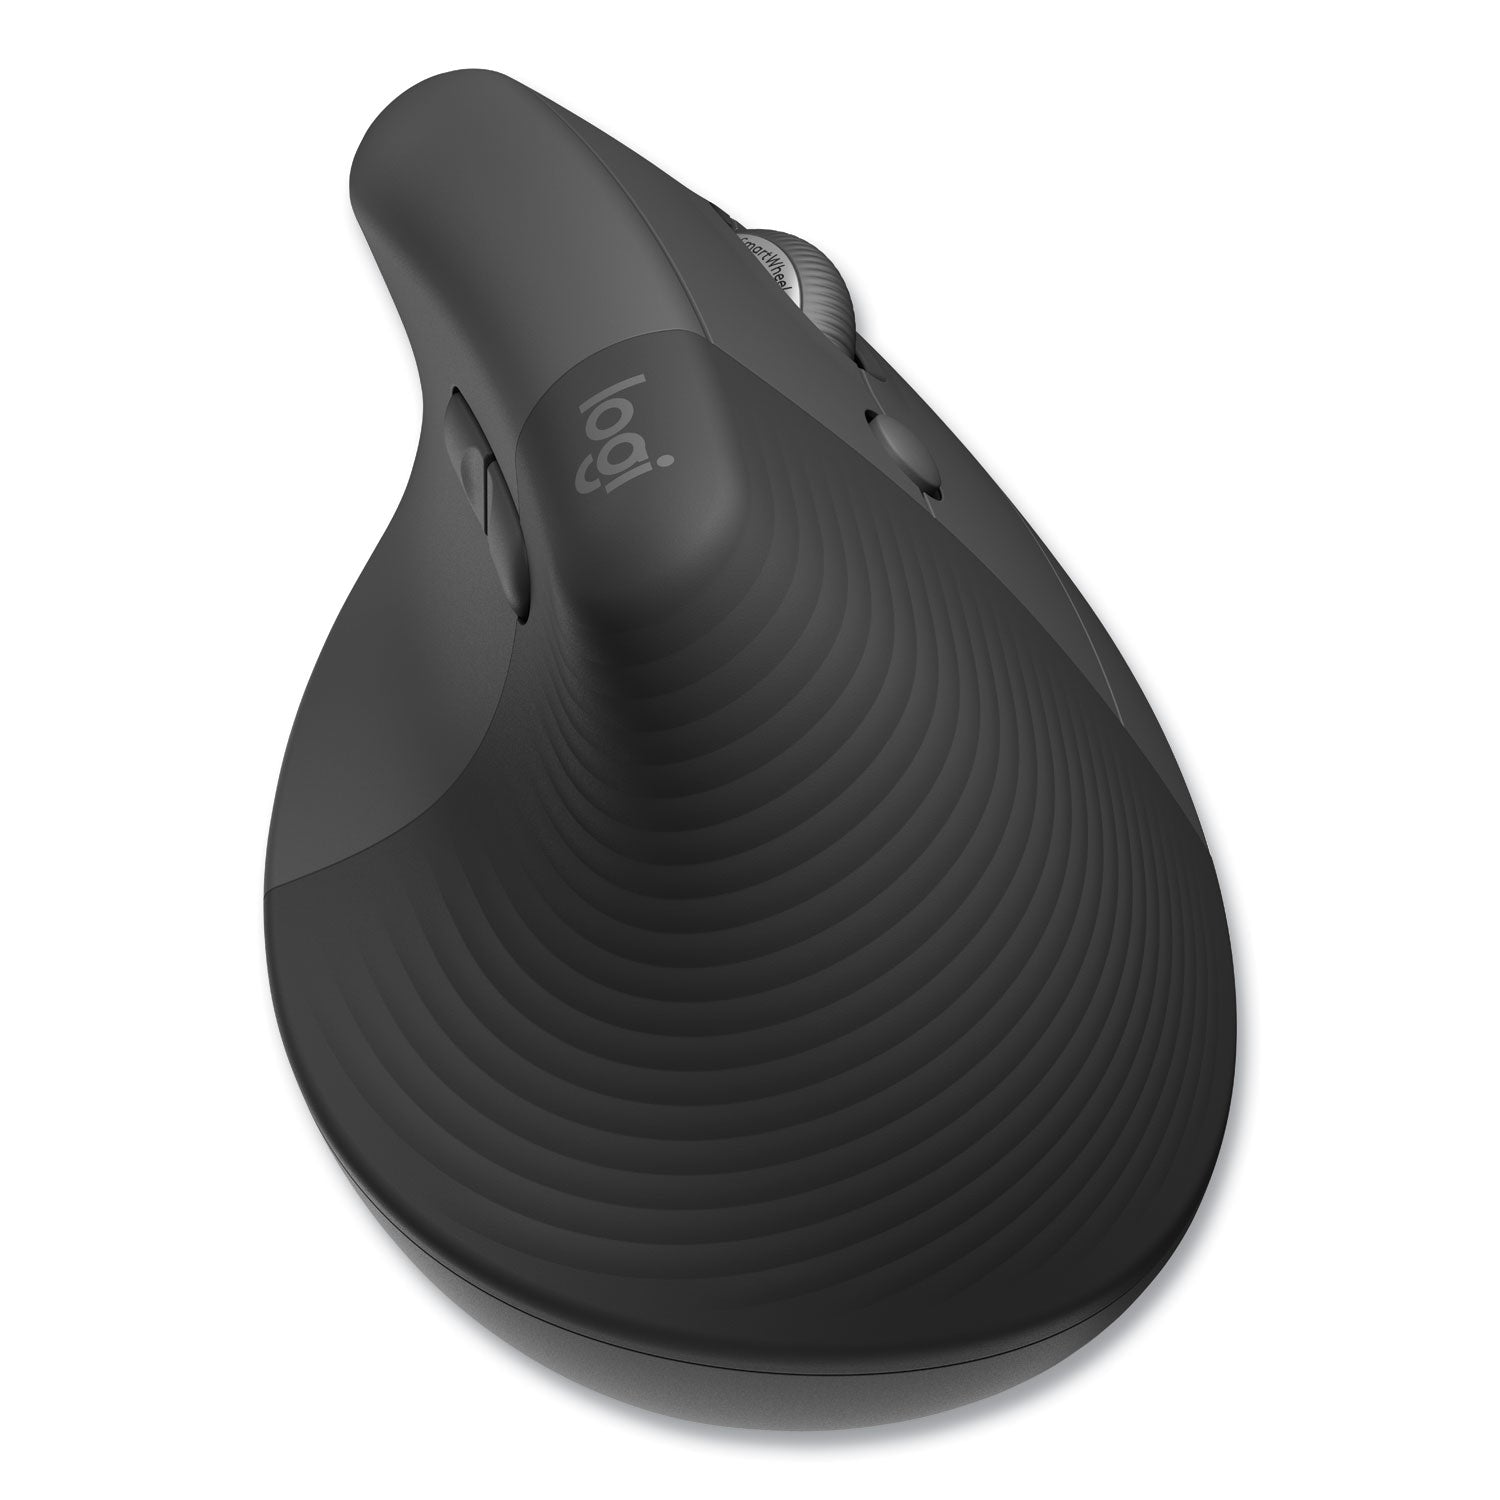 lift-for-business-vertical-ergonomic-mouse-24-ghz-frequency-32-ft-wireless-range-right-hand-use-graphite_log910006491 - 2